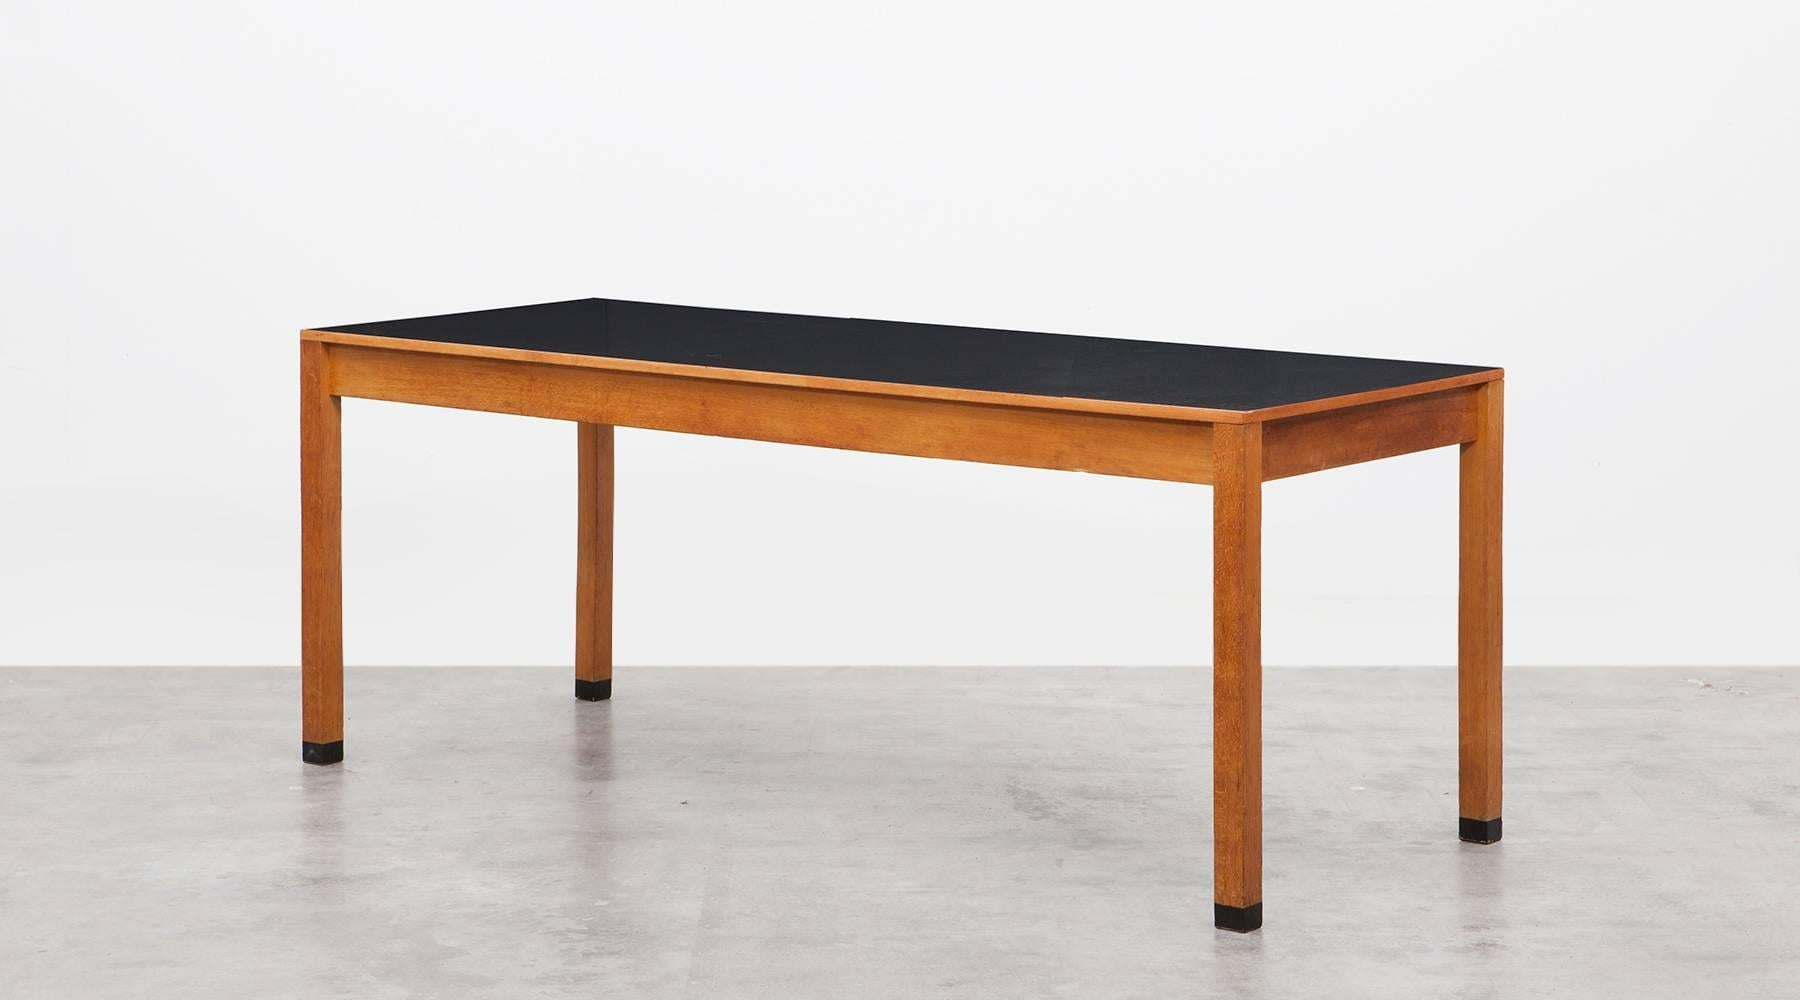 ​Purposeful Ferdinand Kramer table made of wood and linoleum top. This example comes in a comfortable size and pleasant width. We have more tables in this style in stock, with differences in length. All examples are from the 1960s. 

Ferdinand